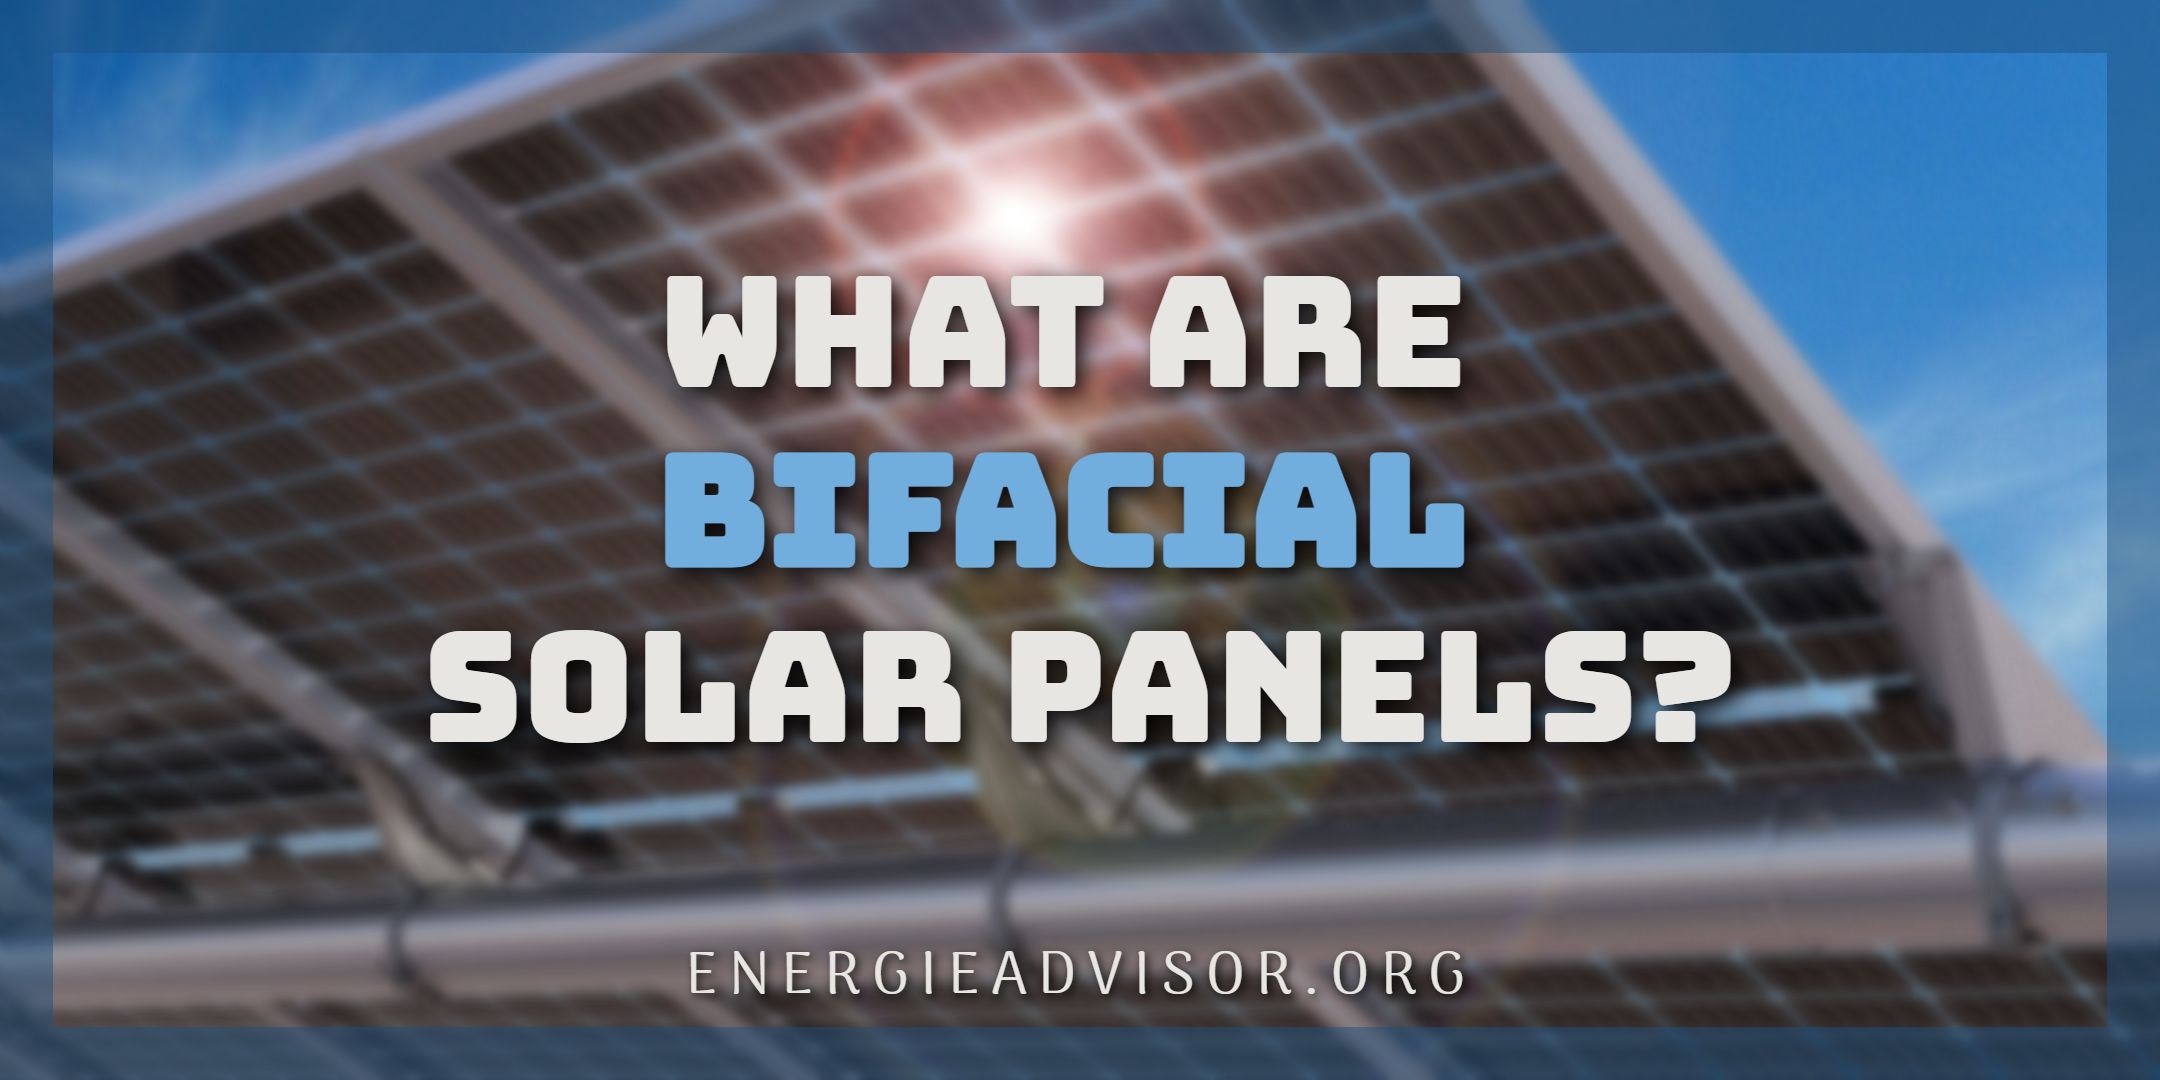 What Are Bifacial Solar Panels?